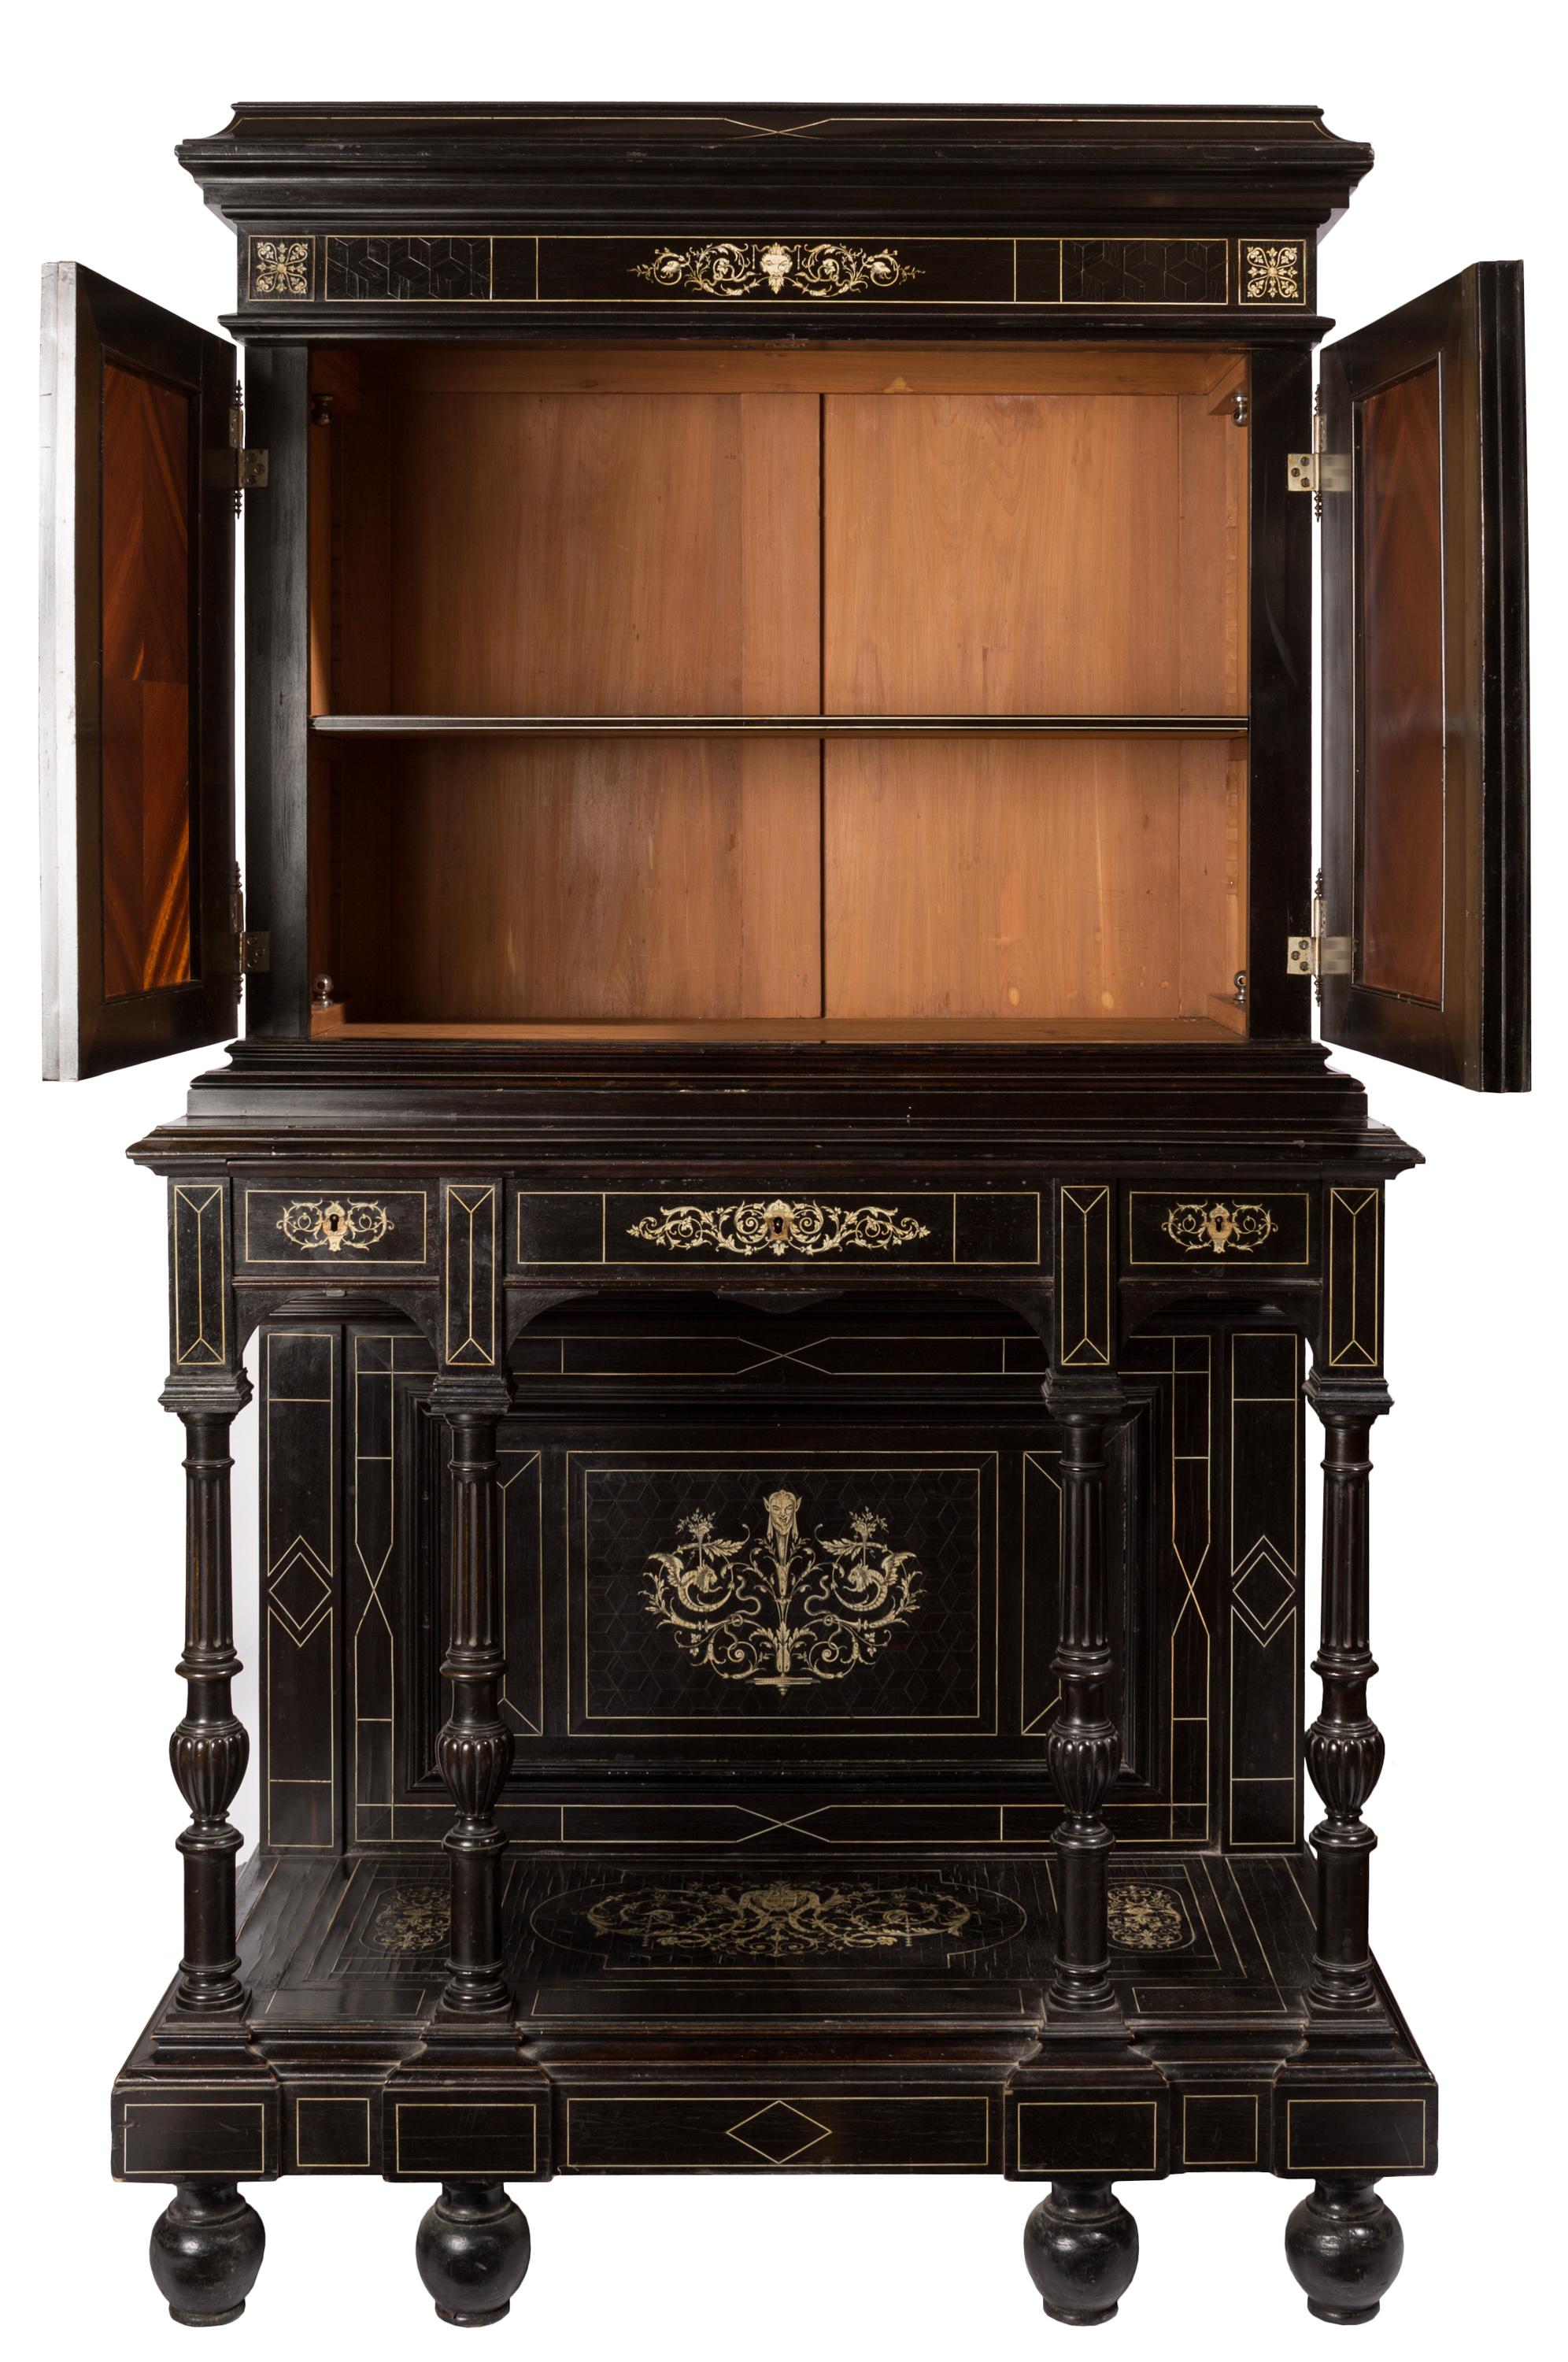 A striking black and white 19th century Florentine Italian decorative cabinet, in ebonized wood with bone inlay marquetry detailing. The design is historicist, referring directly back to Italian Mannerist style pieces made during the 17th century in